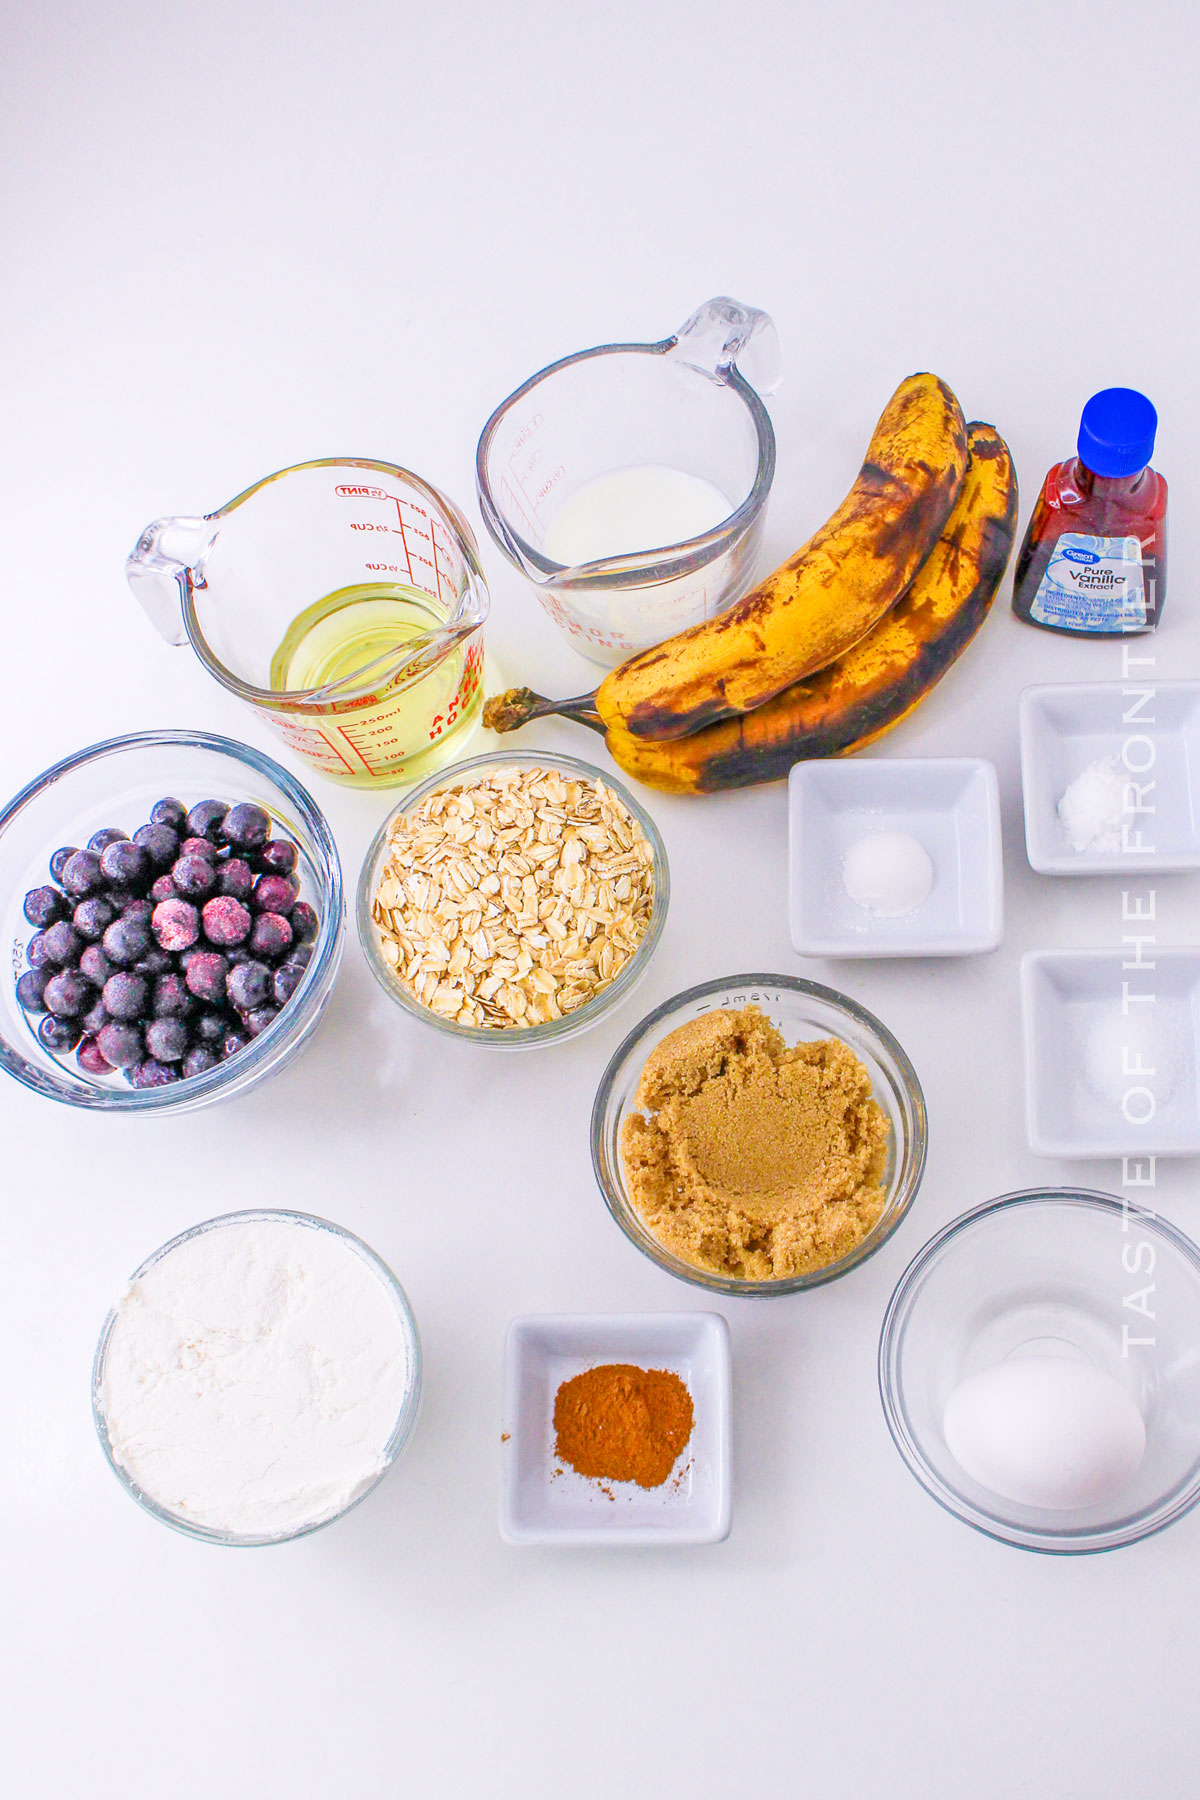 Banana Blueberry Oatmeal Muffin ingredients